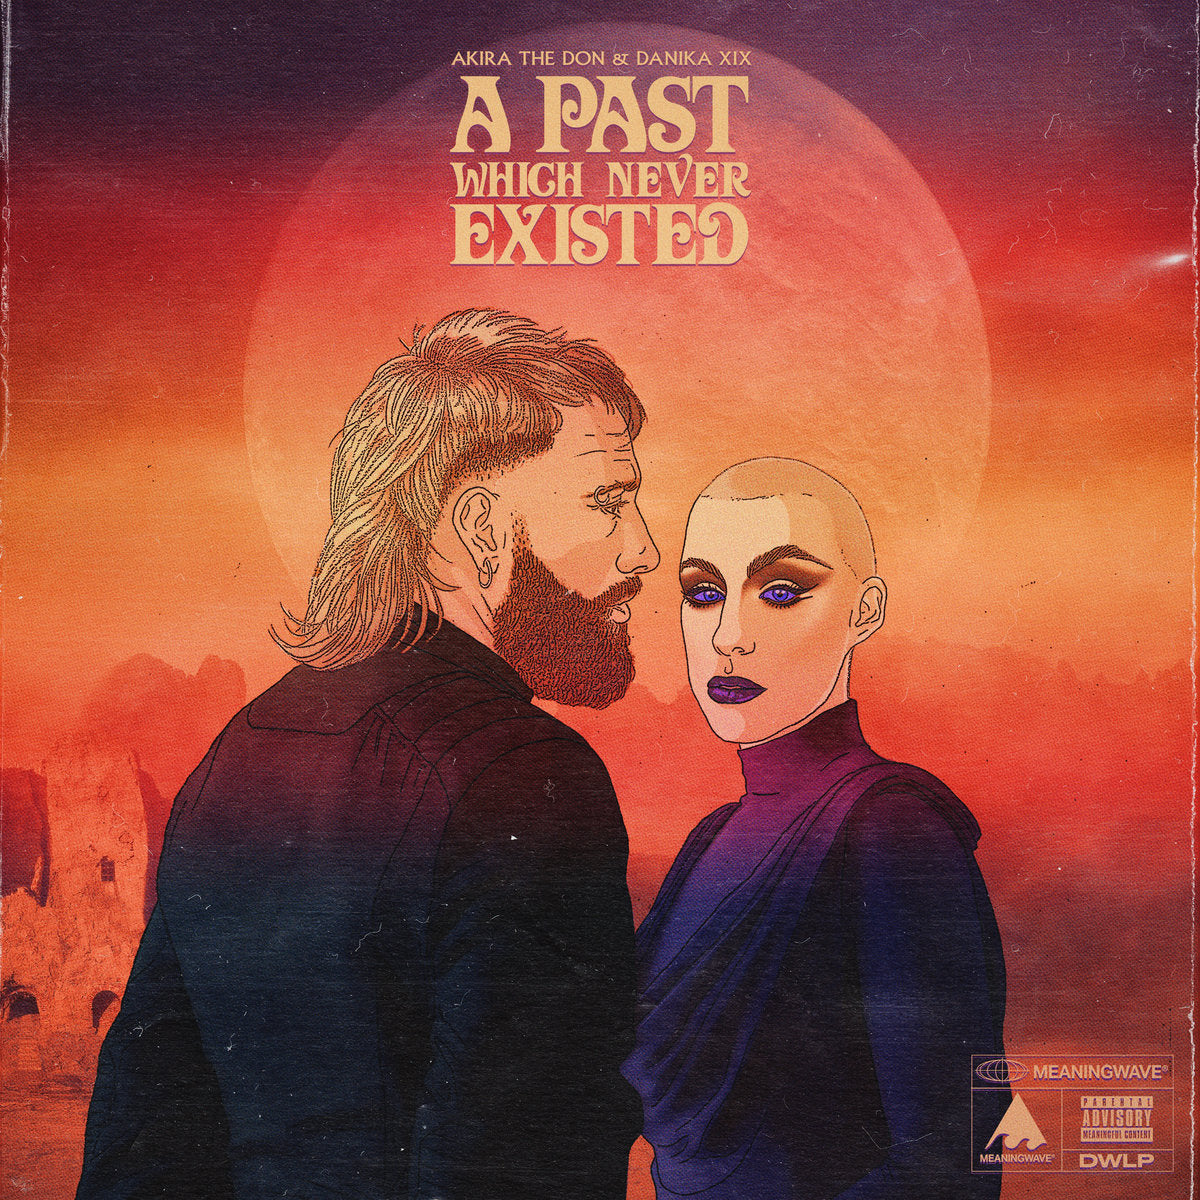 A PAST WHICH NEVER EXISTED (ft. Danika XIX)